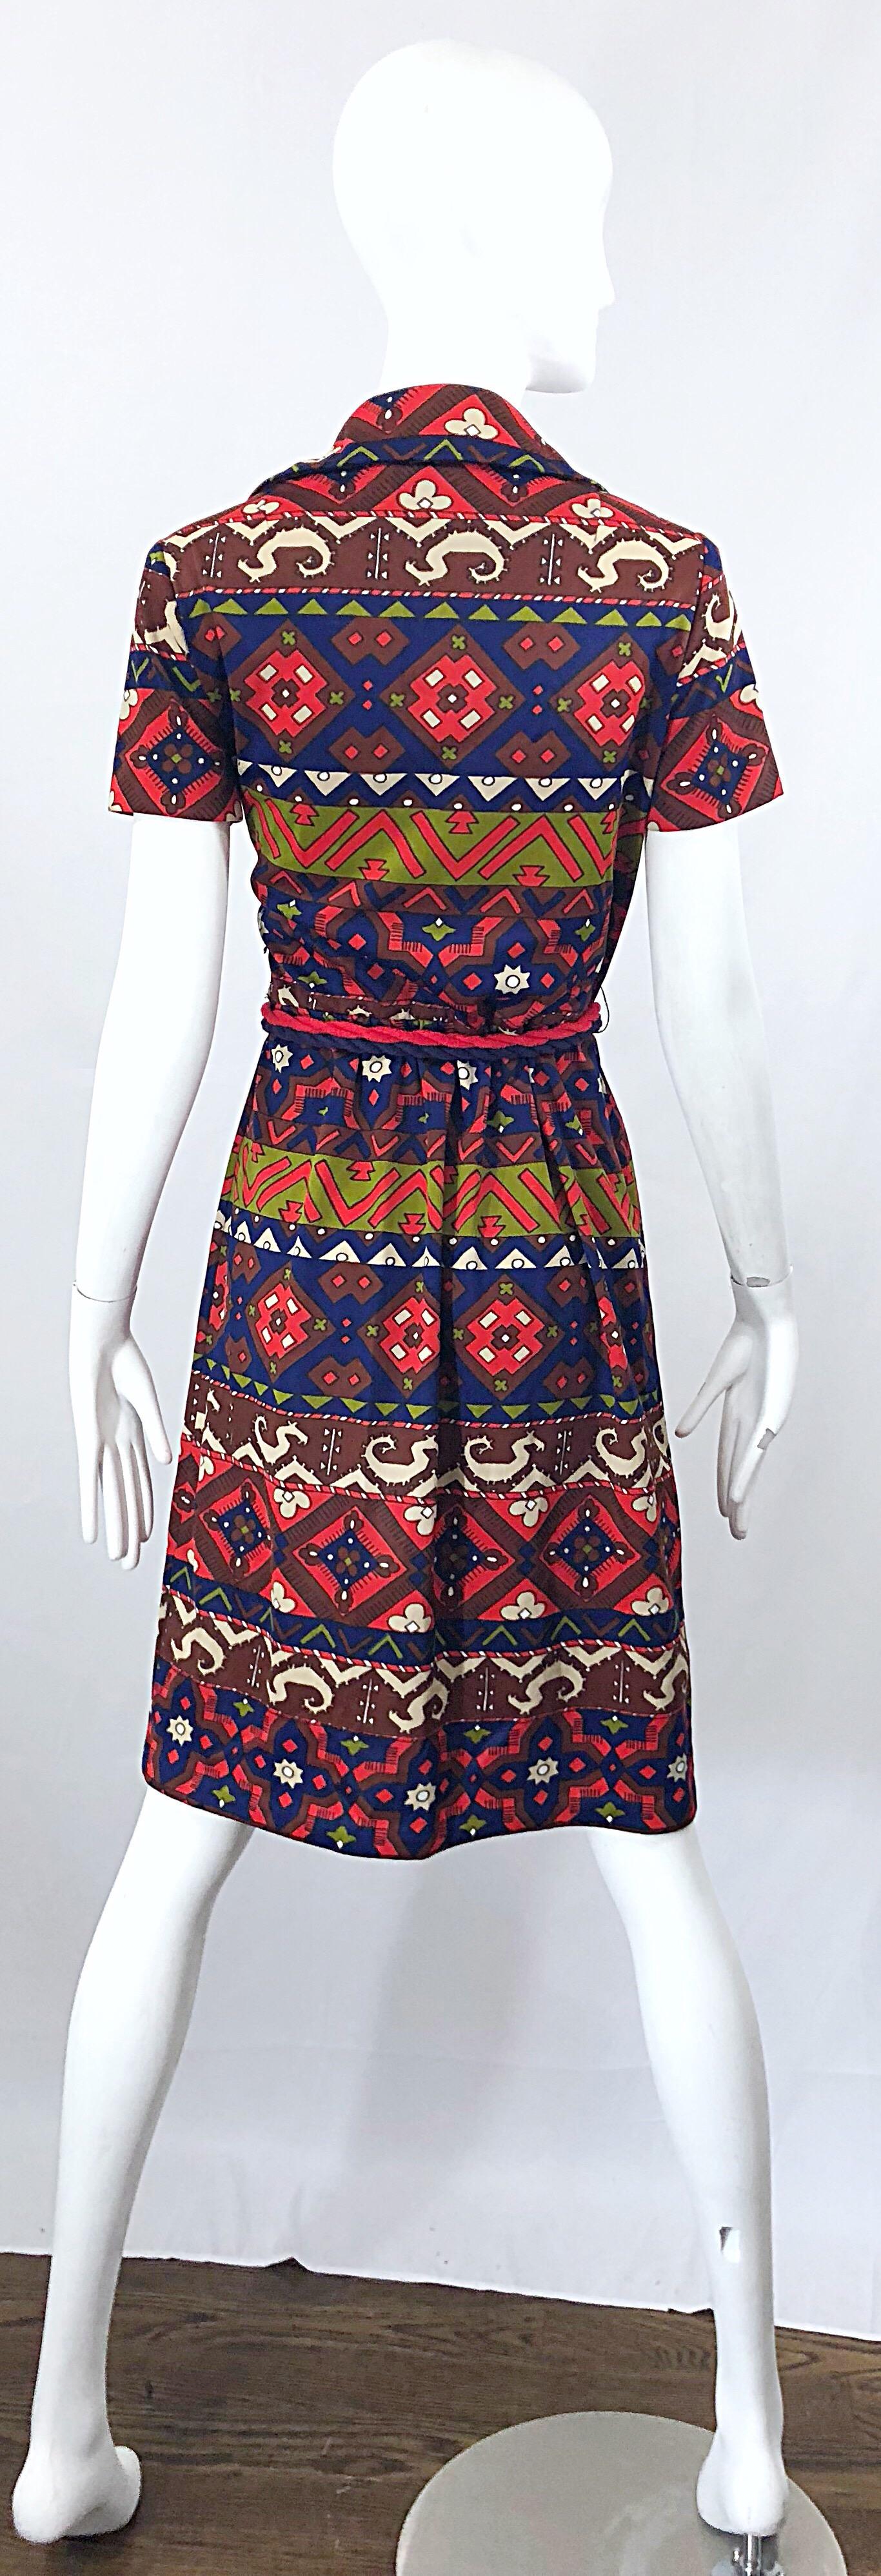 1970s Aztec Novelty Print Amazing Vintage 70s Knit Rope Belted Shirt Dress For Sale 3